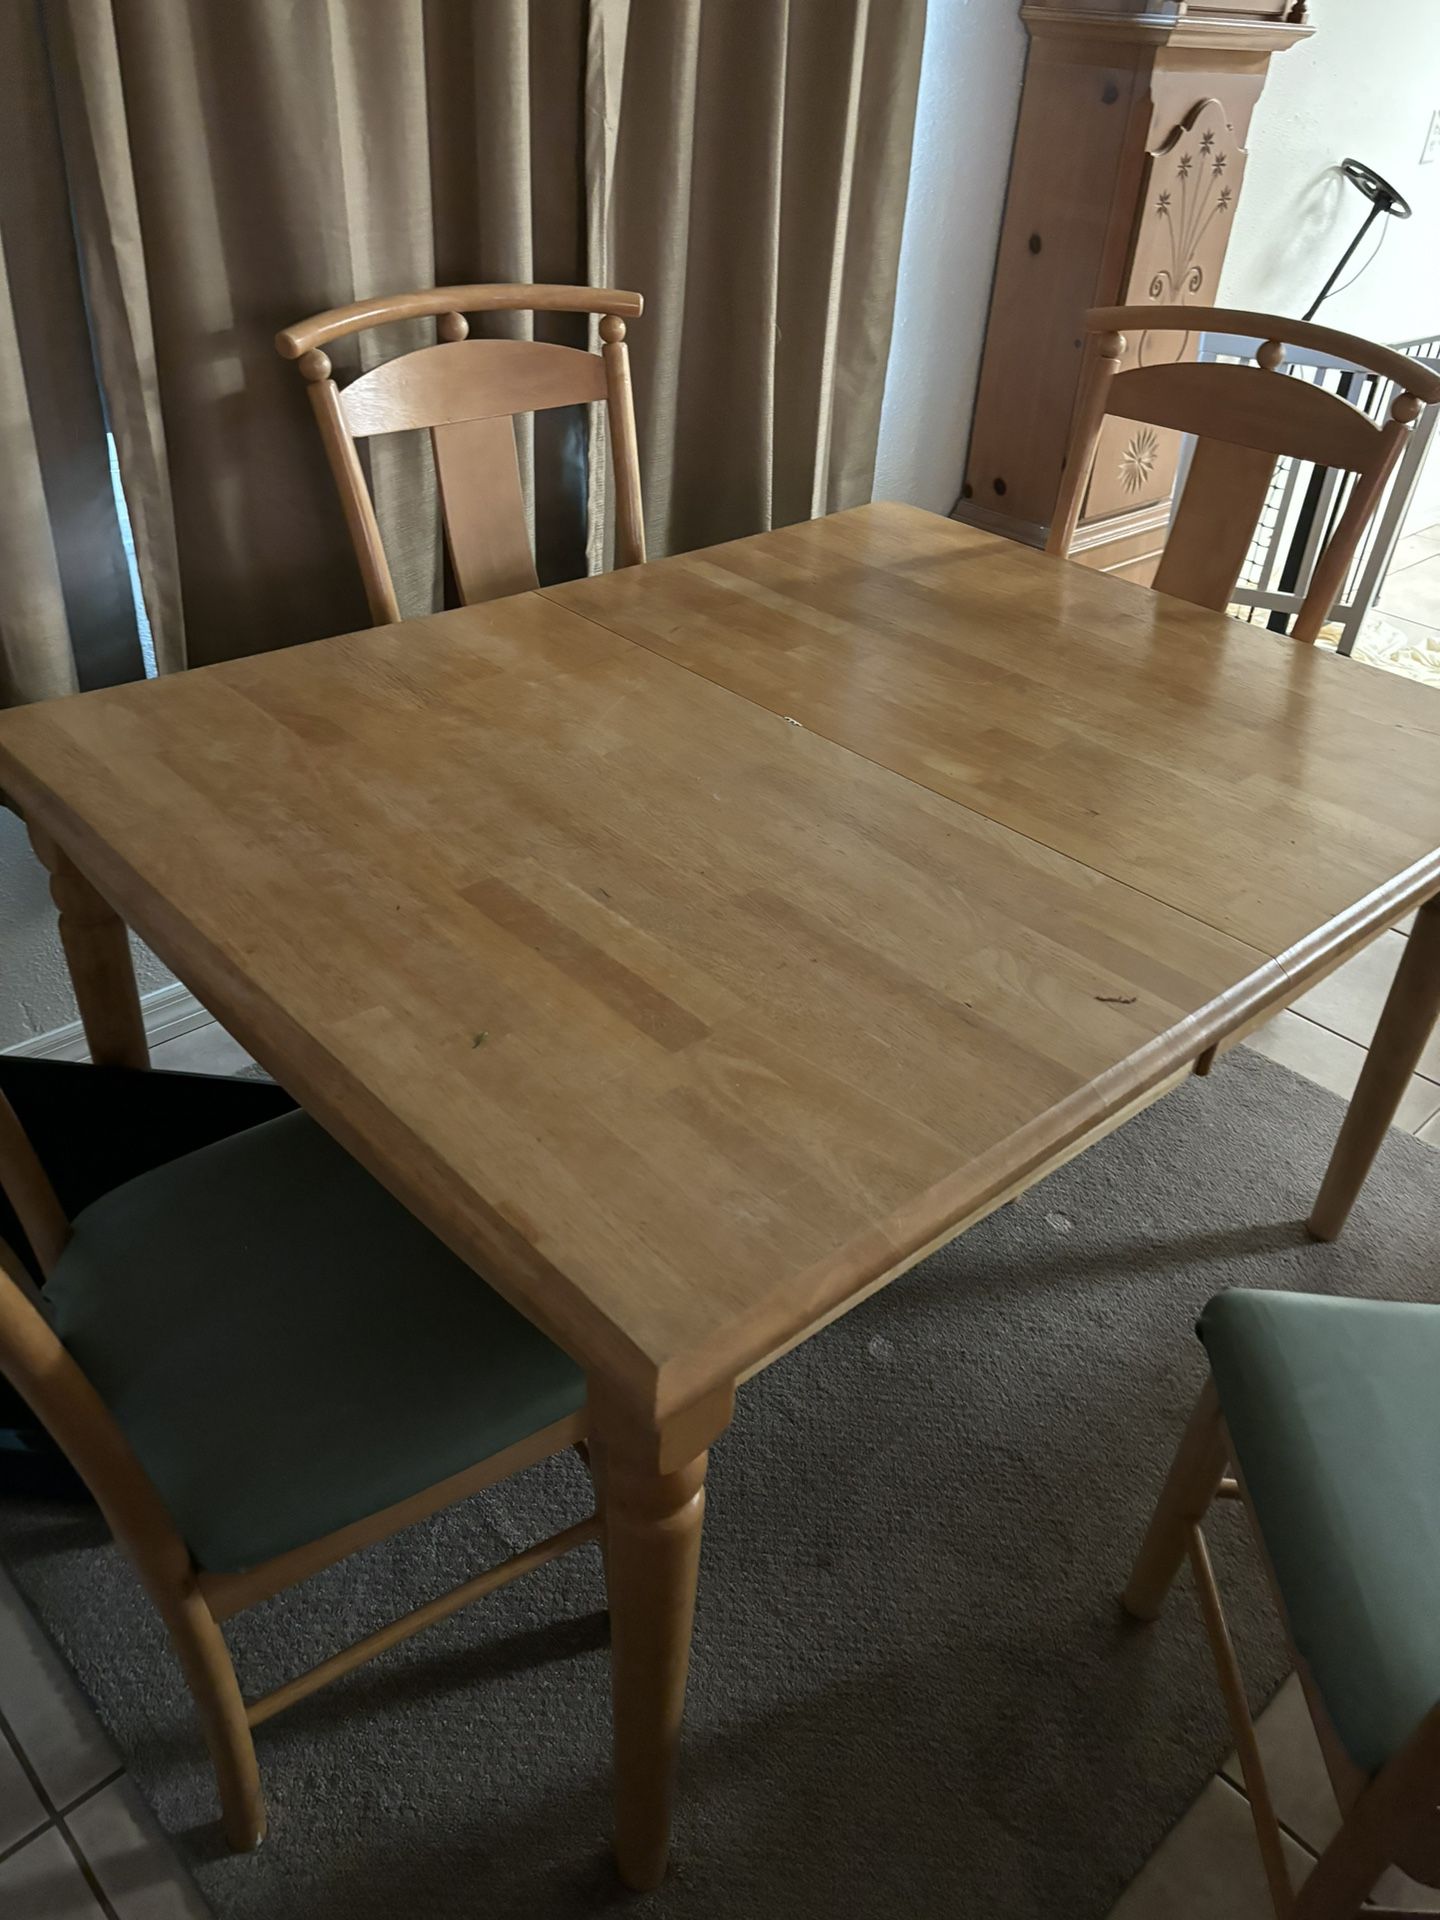 Pine Dining Table